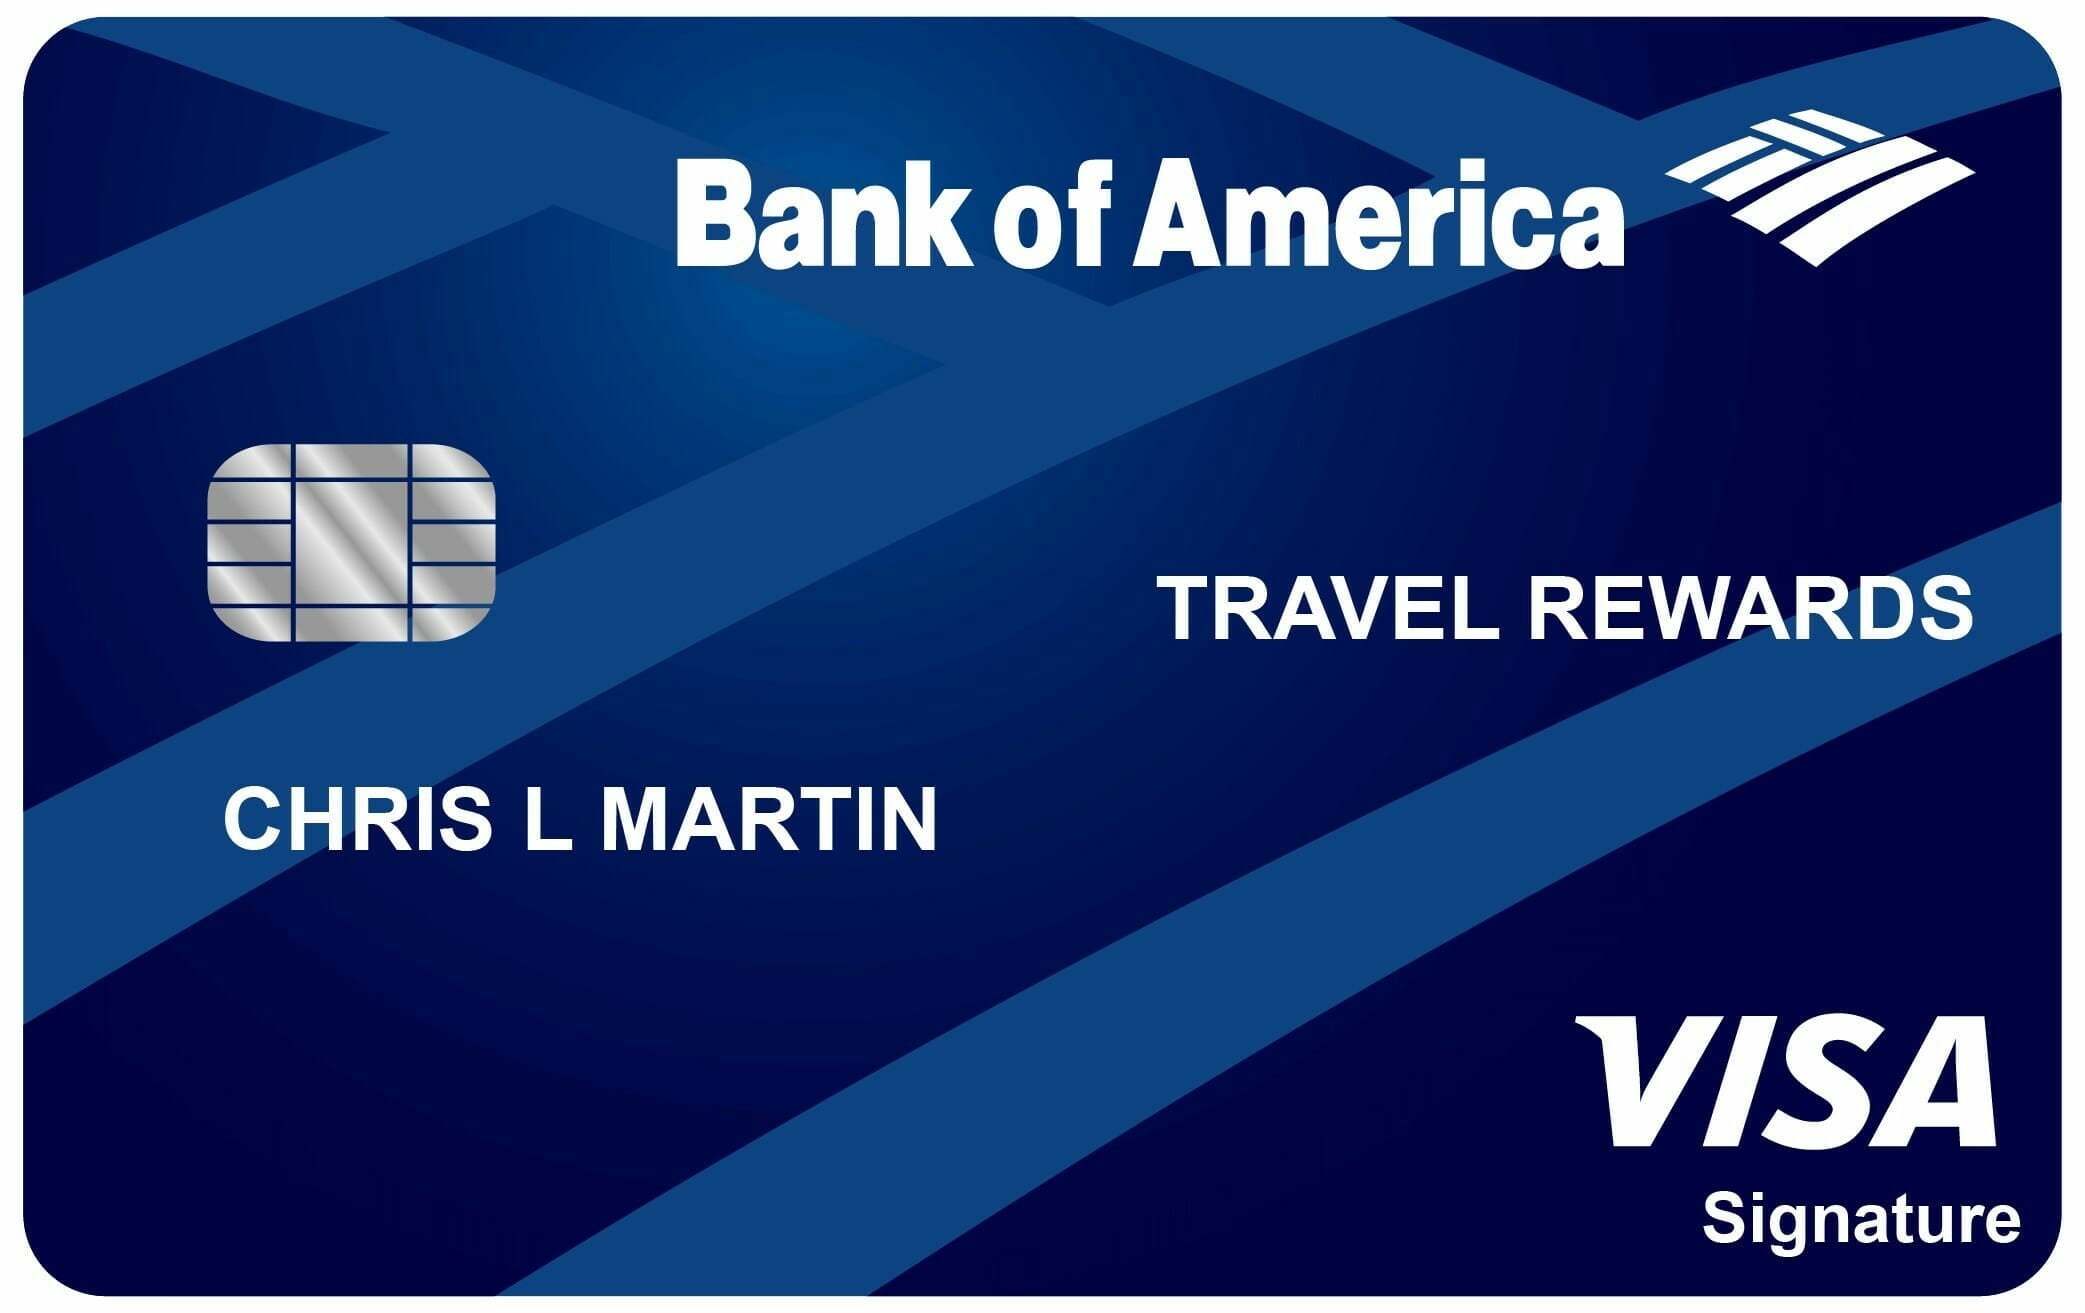 Bank of America Travel Rewards credit card for students